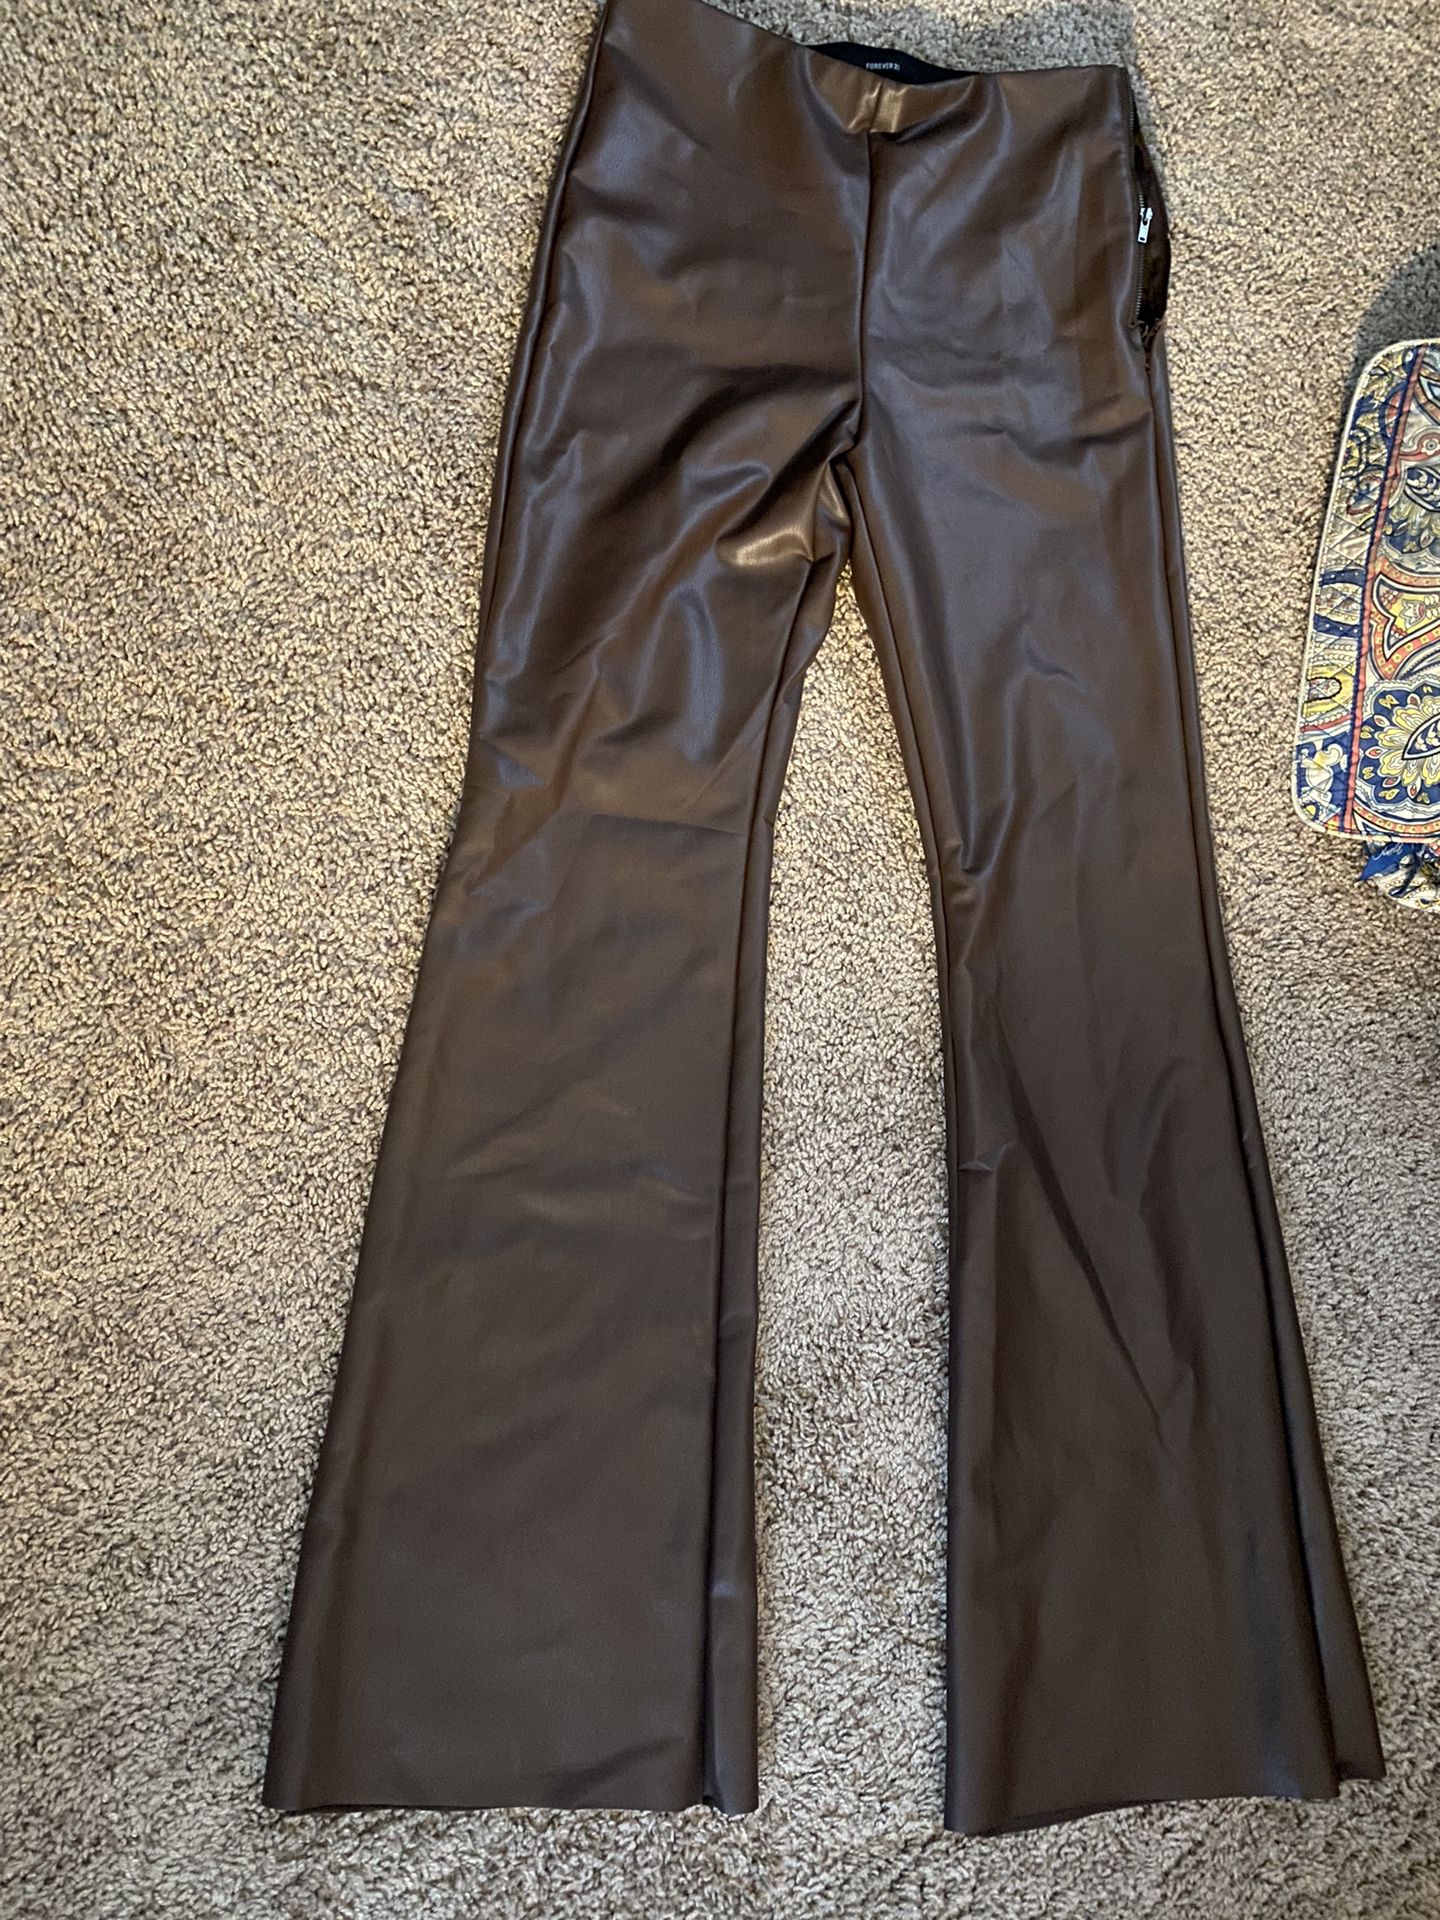 FOREVER 21 Brown Faux Leather Pants Large Elastic Wasteband Zipper Side